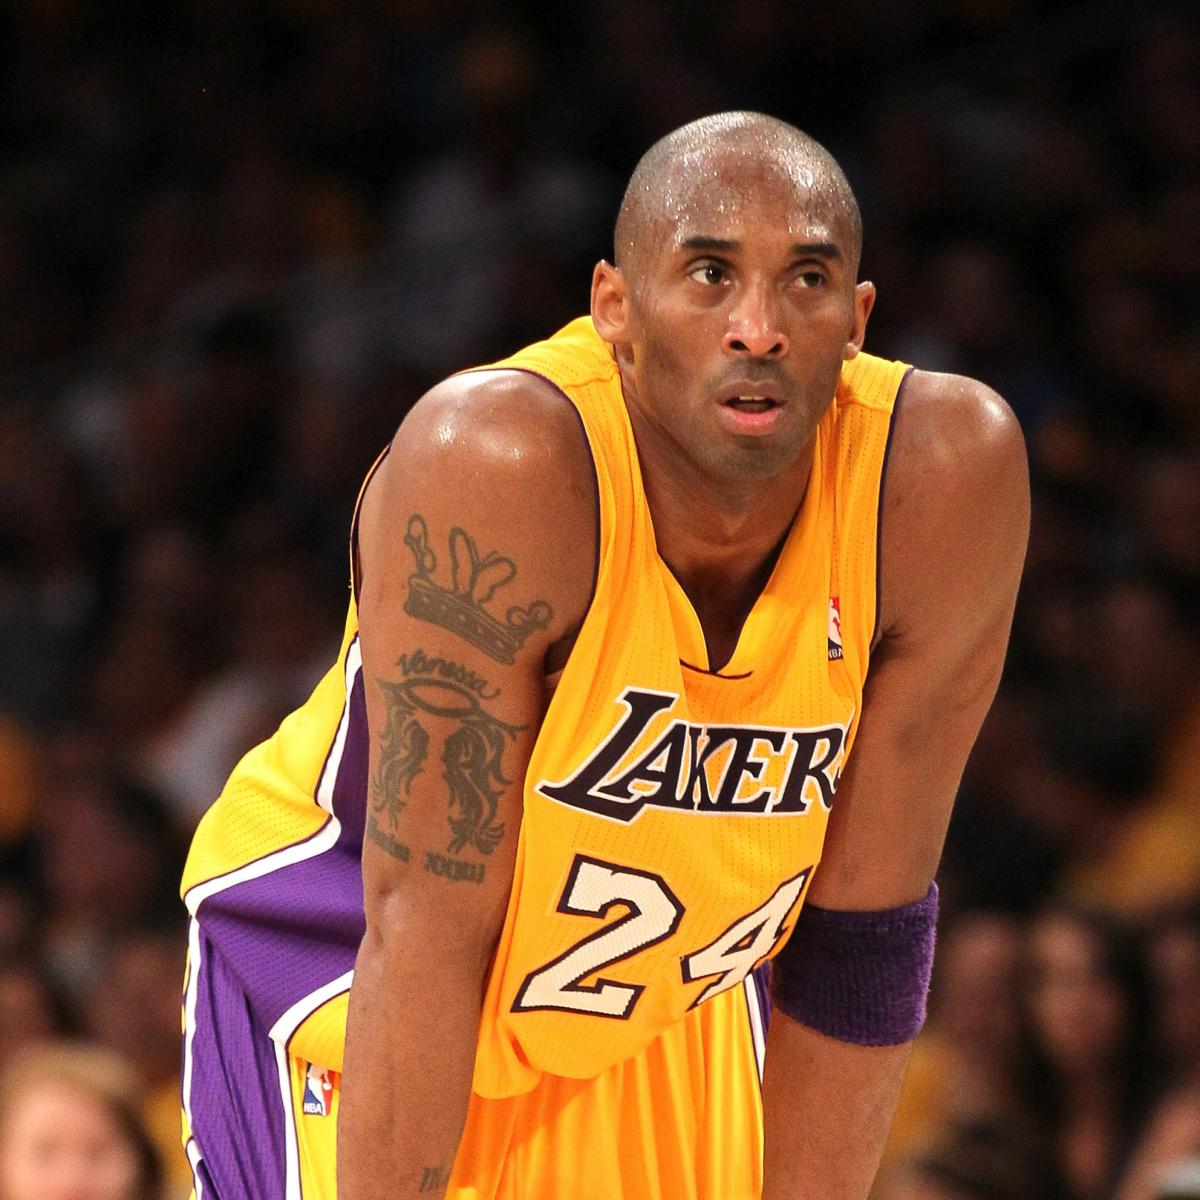 L.A. Lakers' Quest for Another NBA Title Still Rests on Kobe Bryant's ...